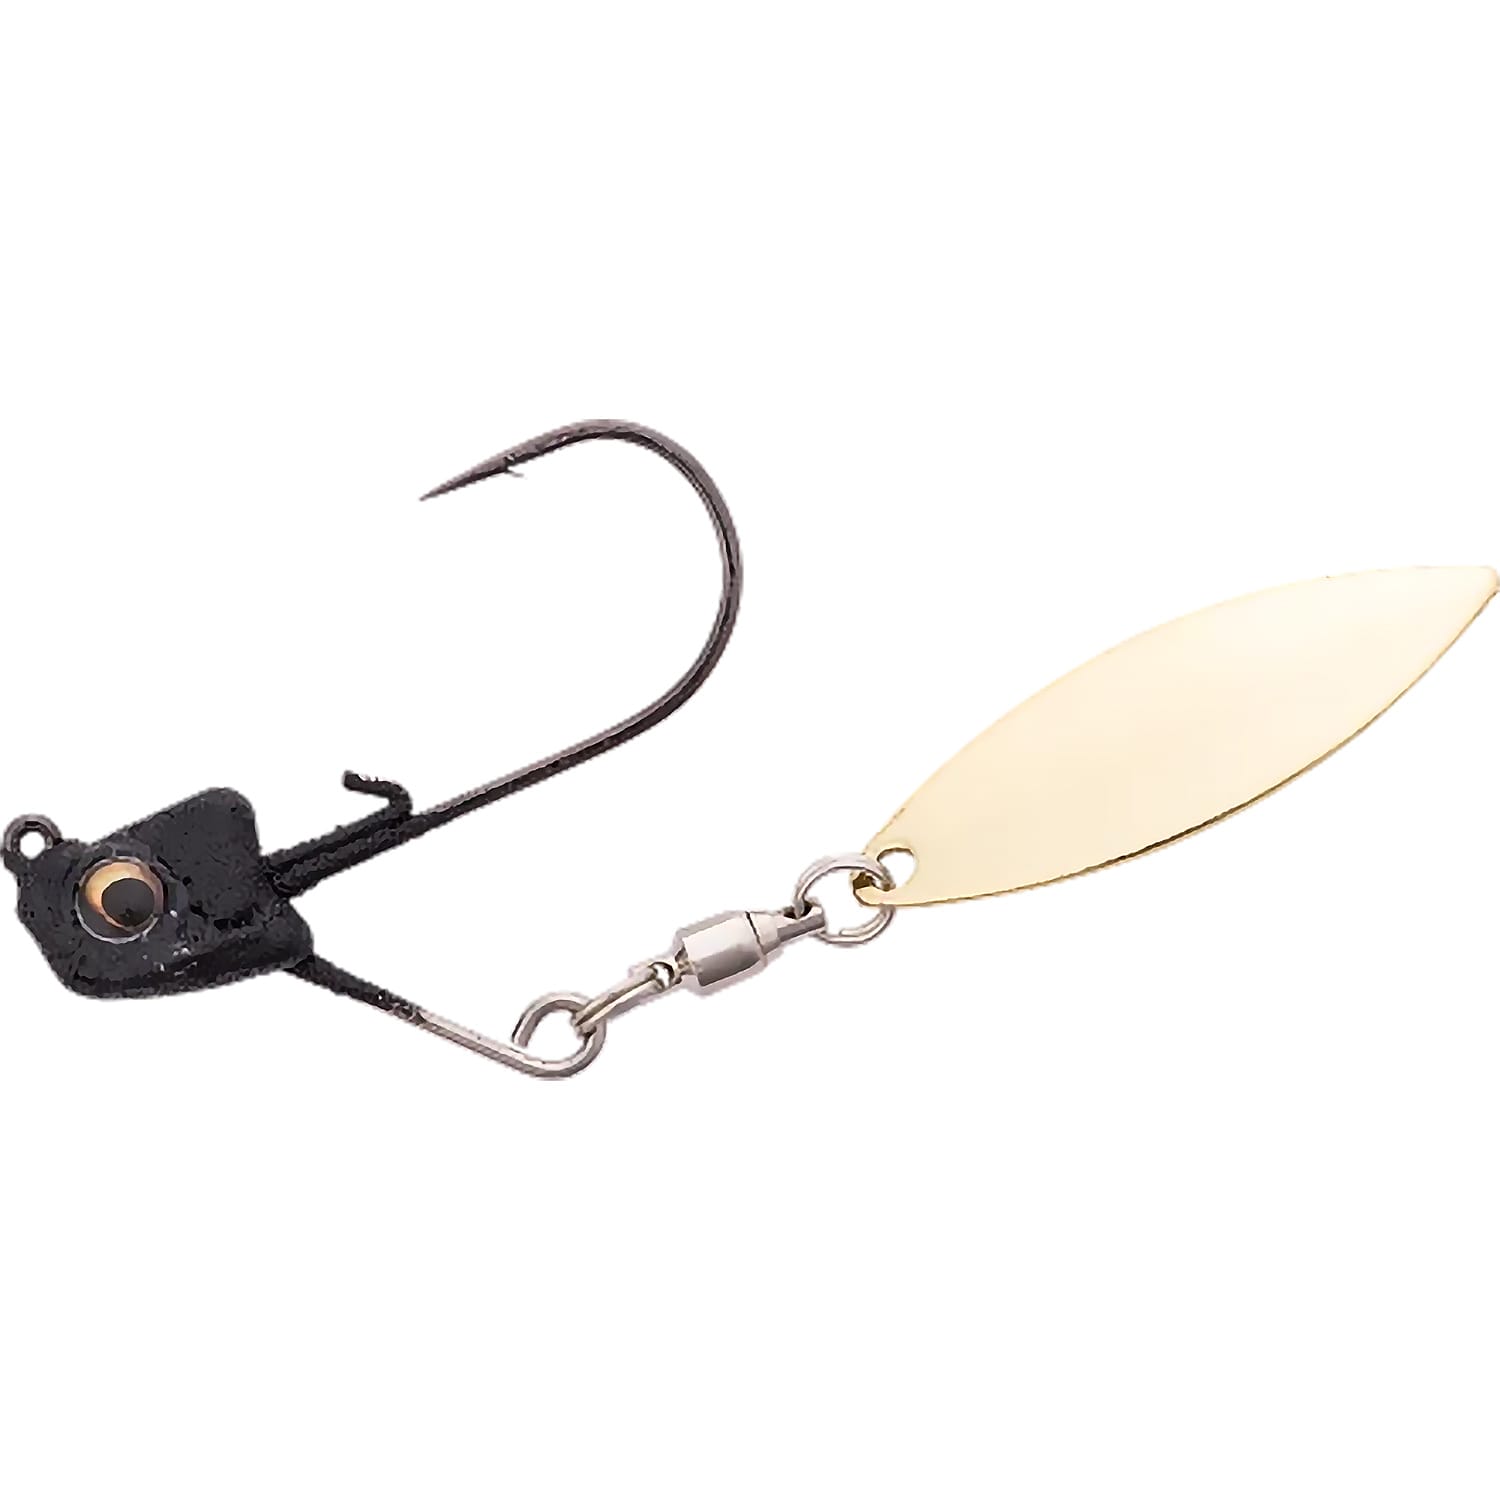 VMC Launches The Swingin' Ned Rig Jig - Fishing Tackle Retailer